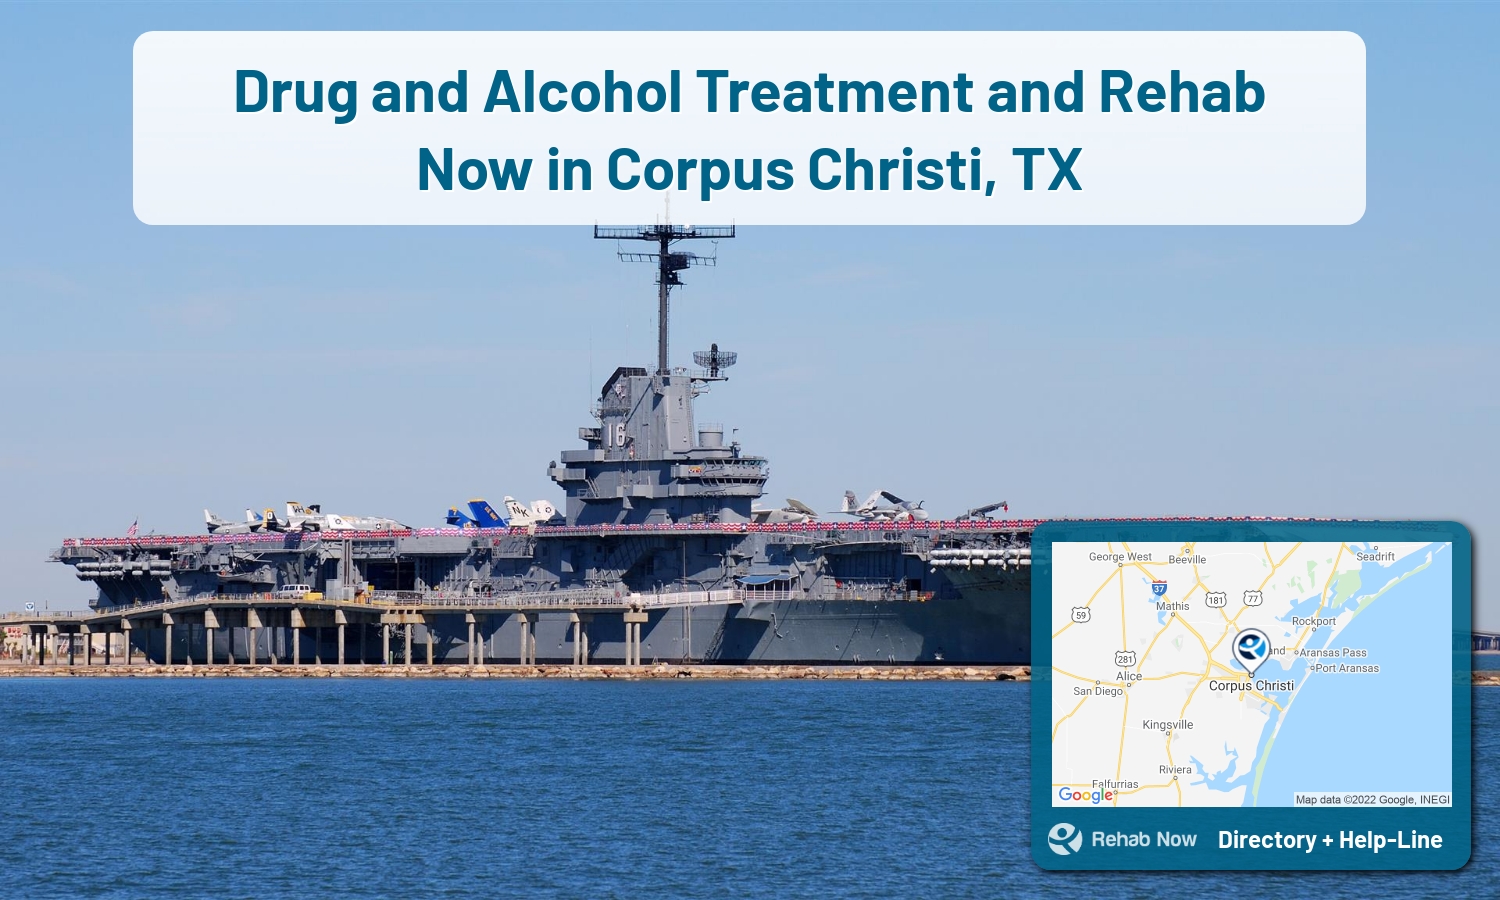 Corpus Christi, TX Treatment Centers. Find drug rehab in Corpus Christi, Texas, or detox and treatment programs. Get the right help now!